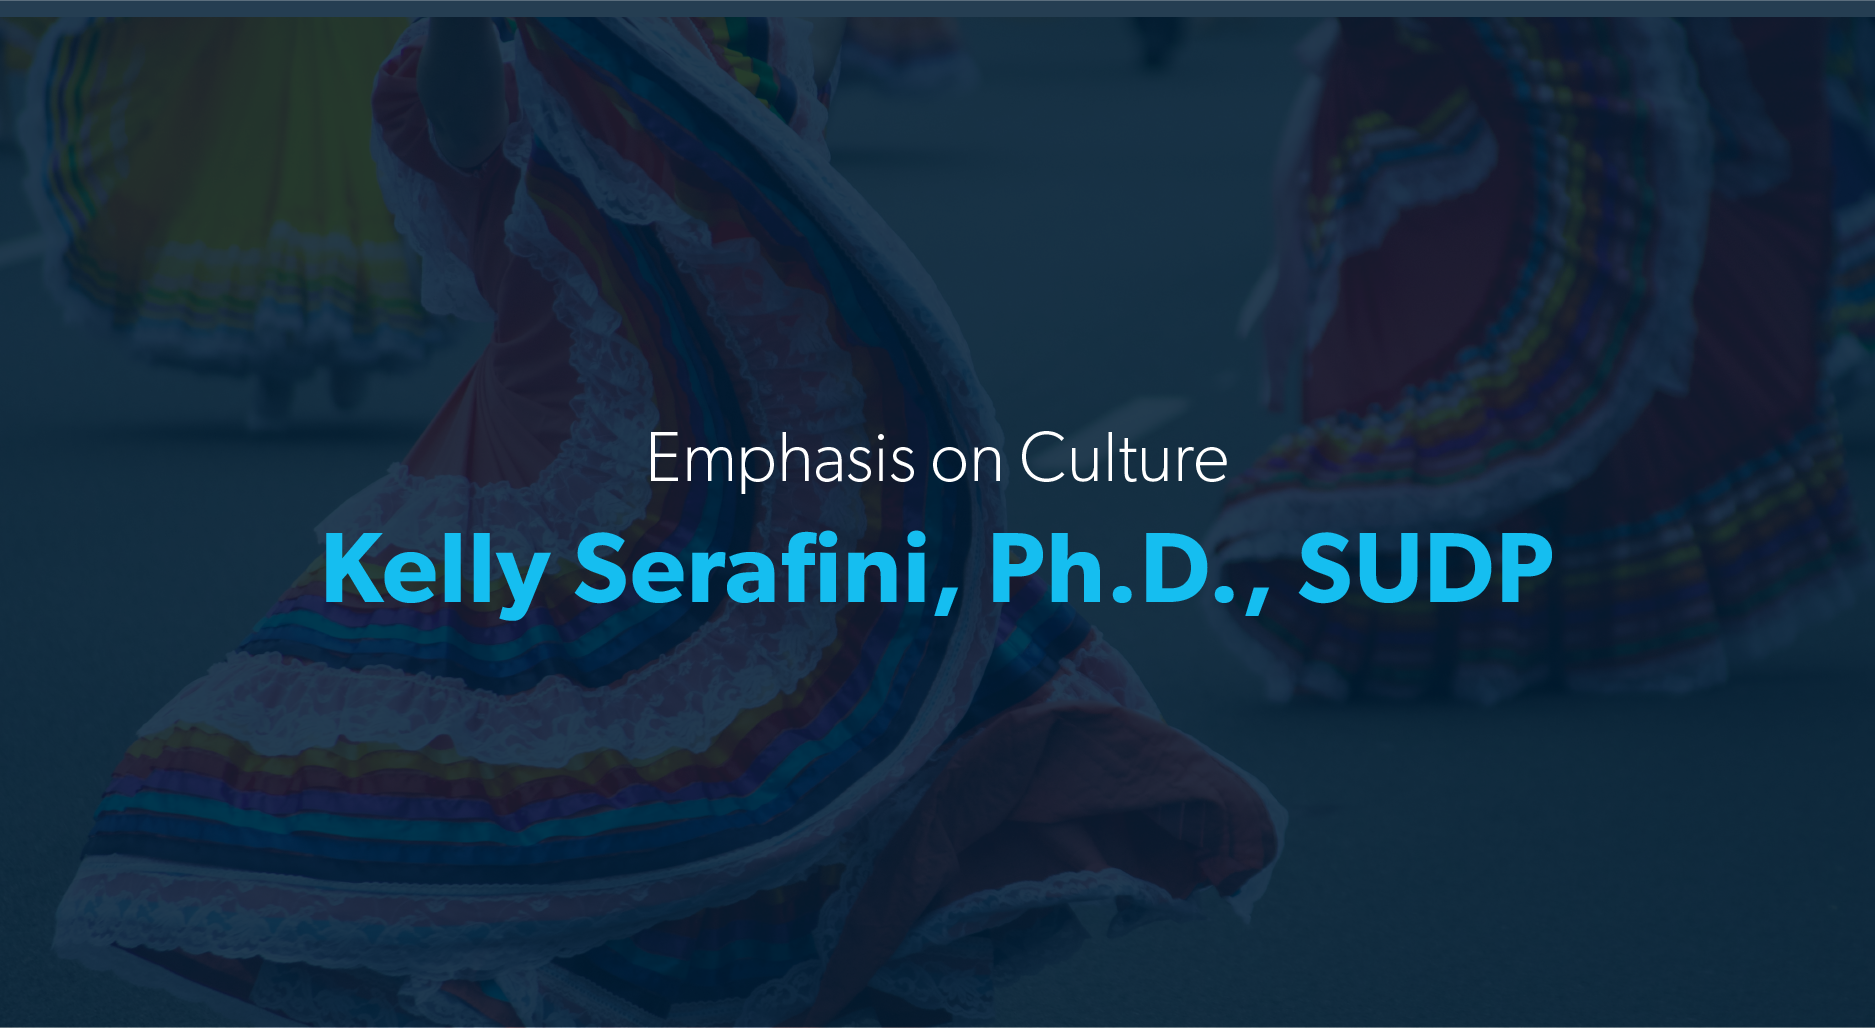 header title with text: "Emphasis on Culture, Kelly Serafini, Ph.D., SUDP"